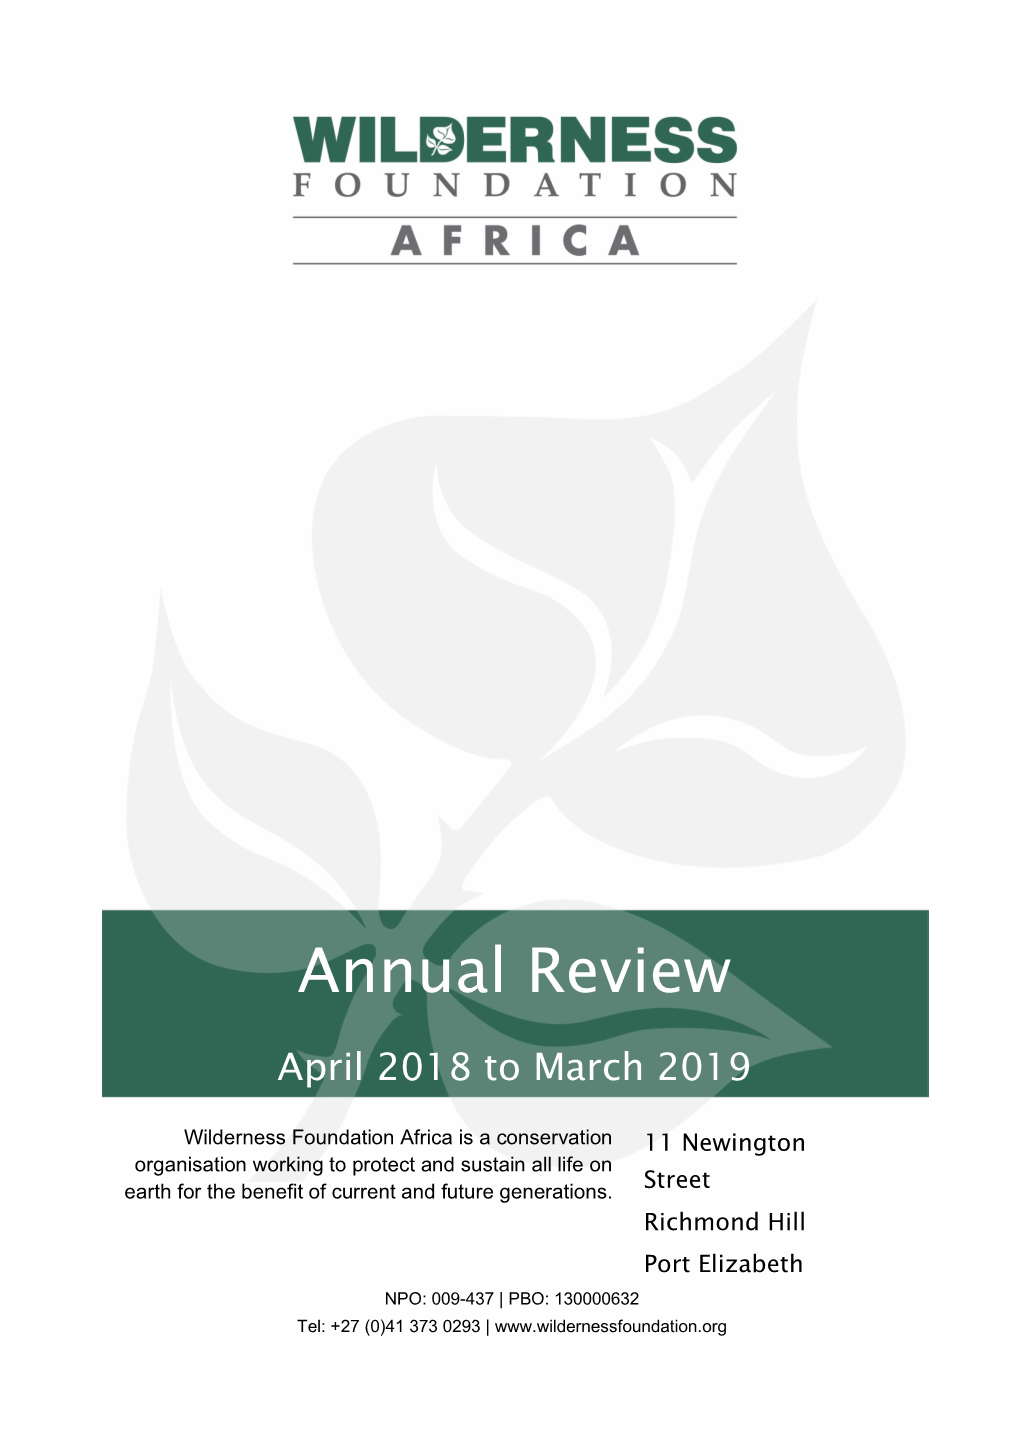 WFA Annual Review 2018/2019